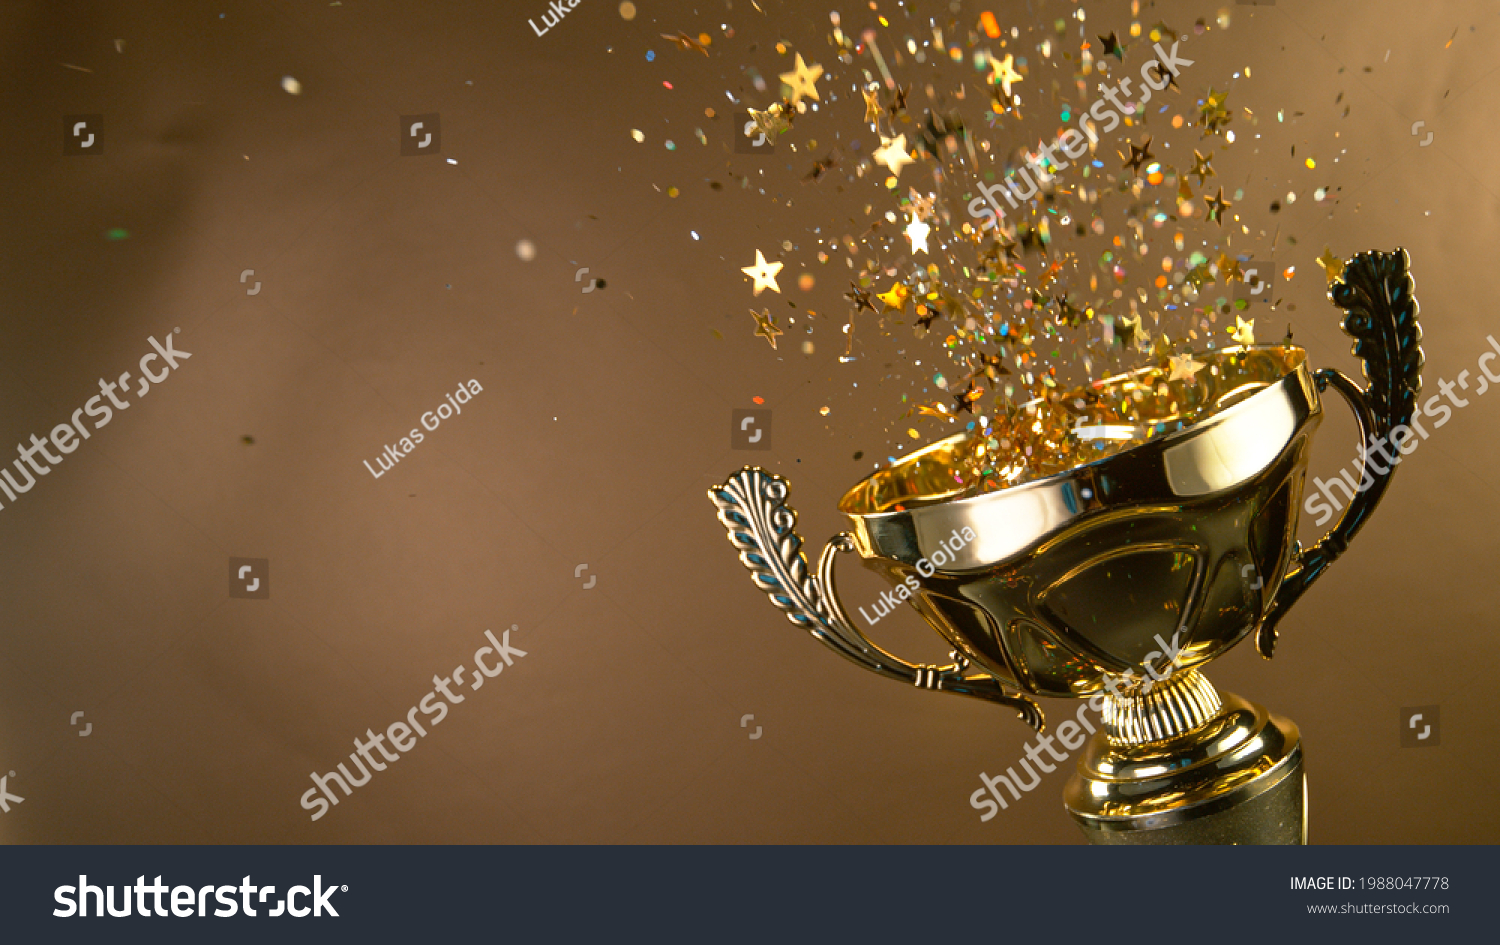 Champion golden trophy isolated on black background. Concept of success and achievement. #1988047778